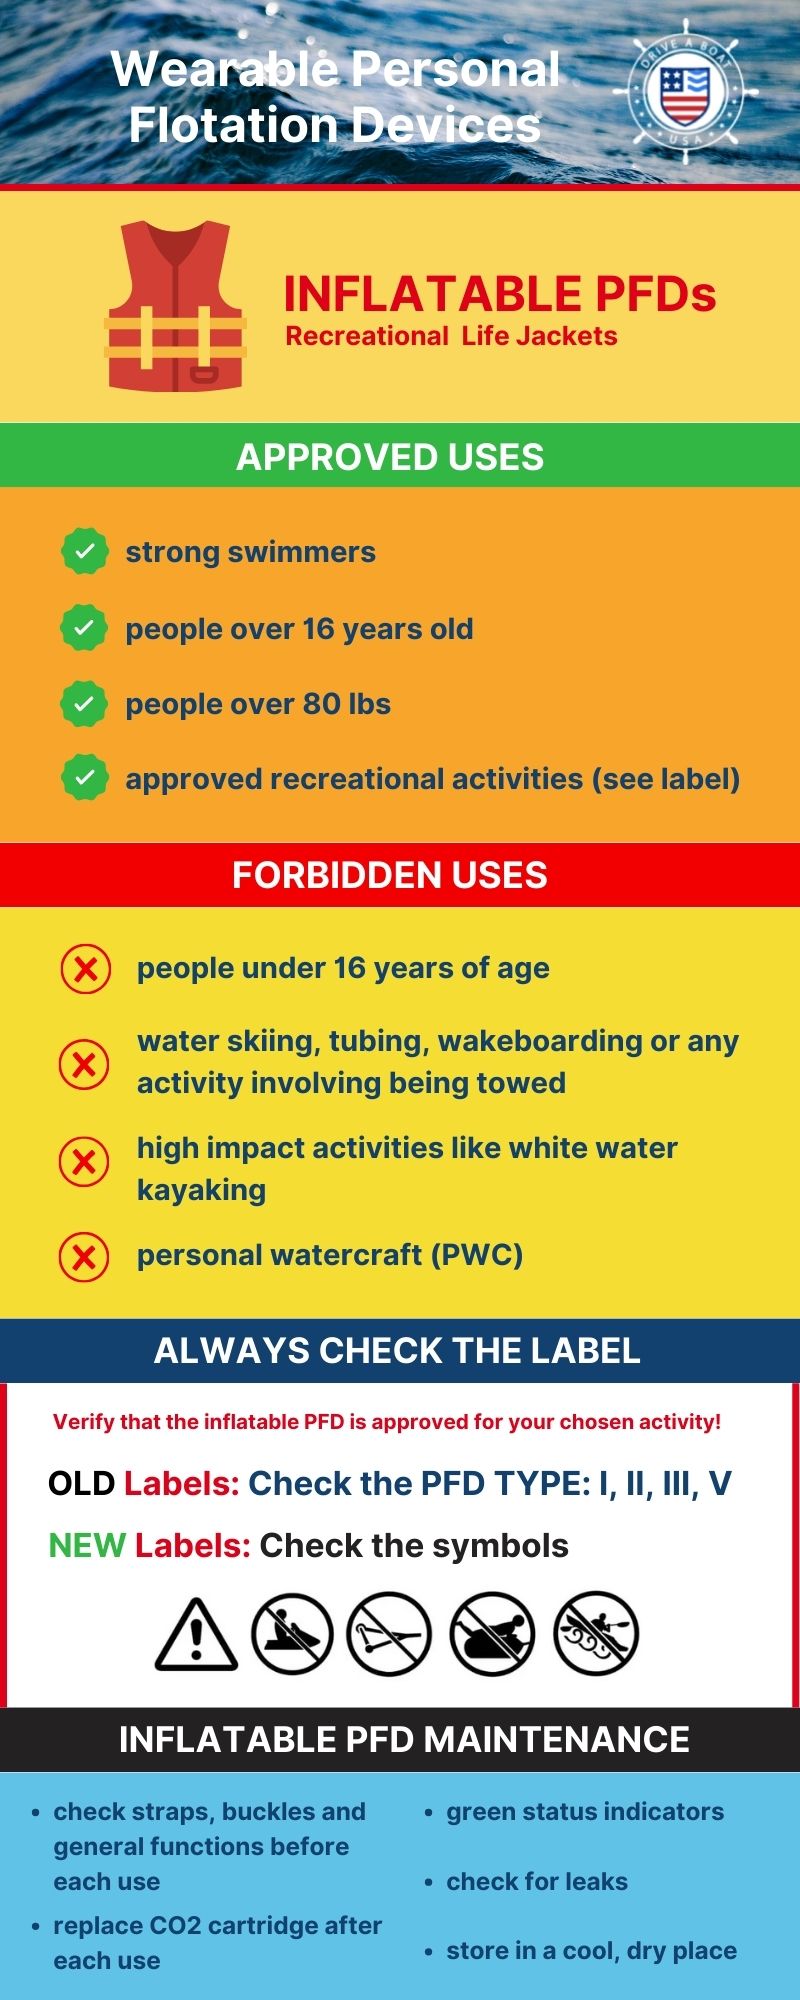 inflatable pfd regulations infographic